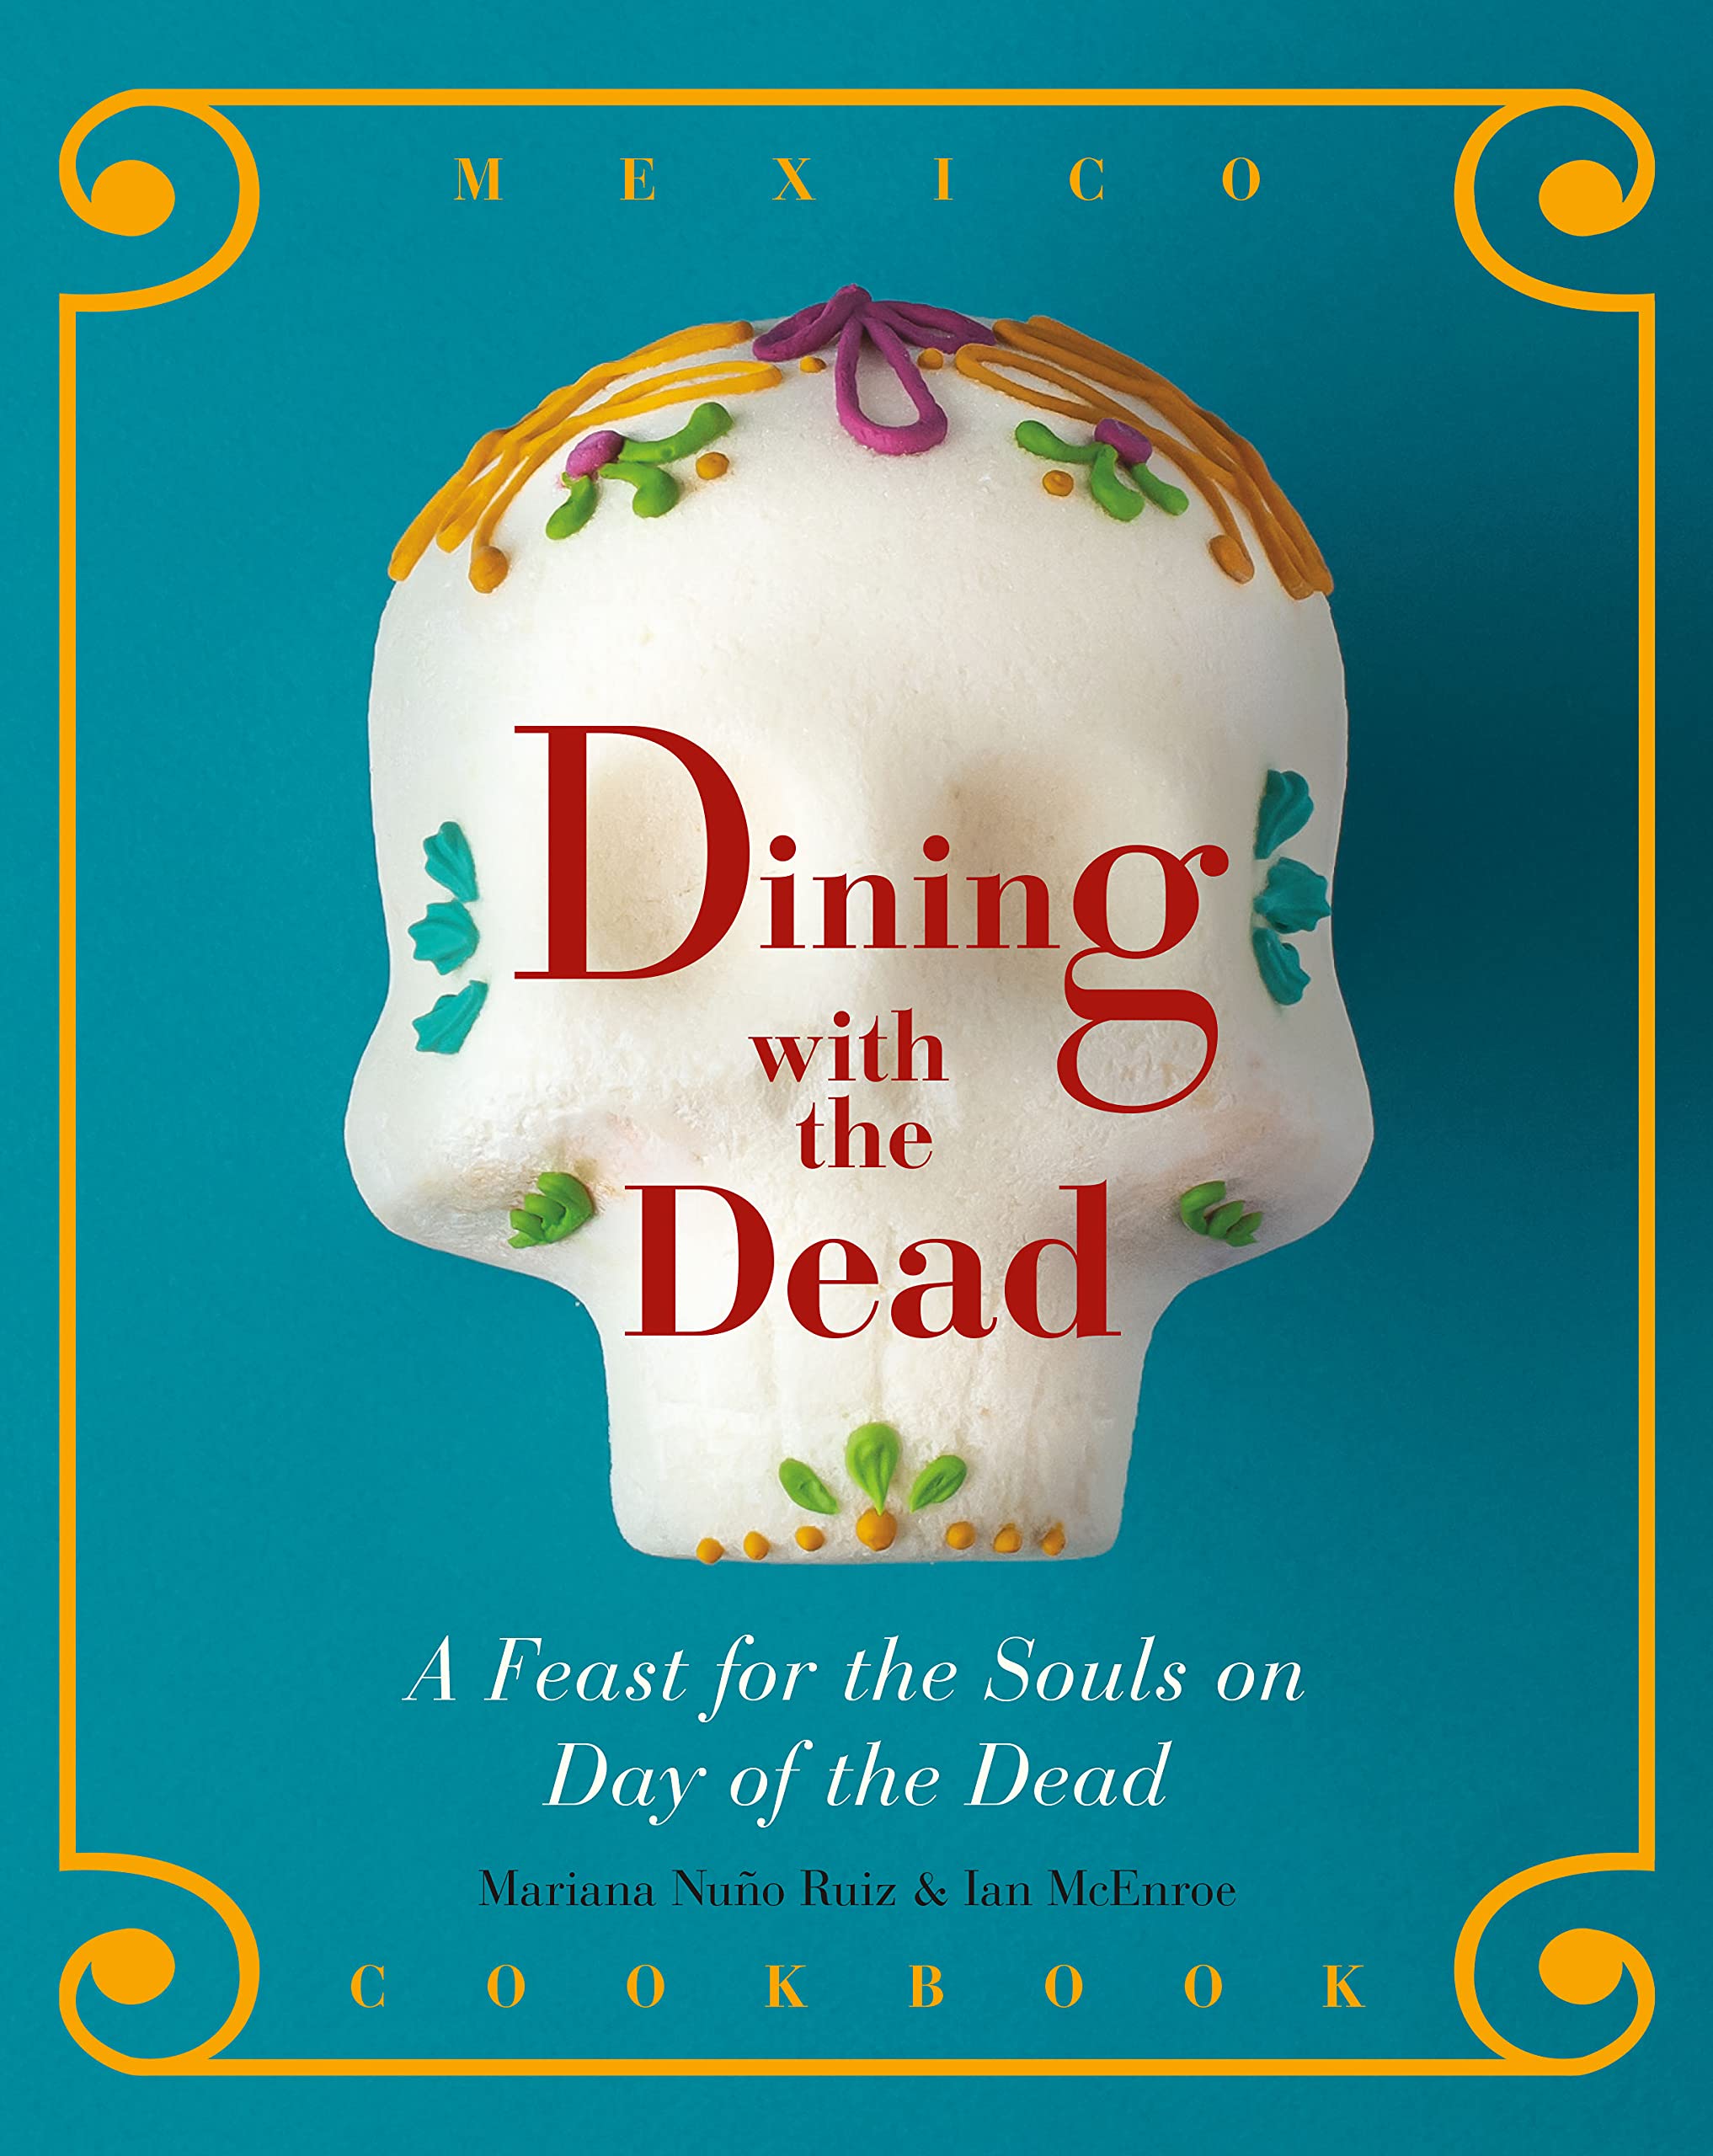 Dining with the Dead: A Feast for the Souls on Day of the Dead (Mariana Nuño Ruiz, Ian McEnroe) *Signed*